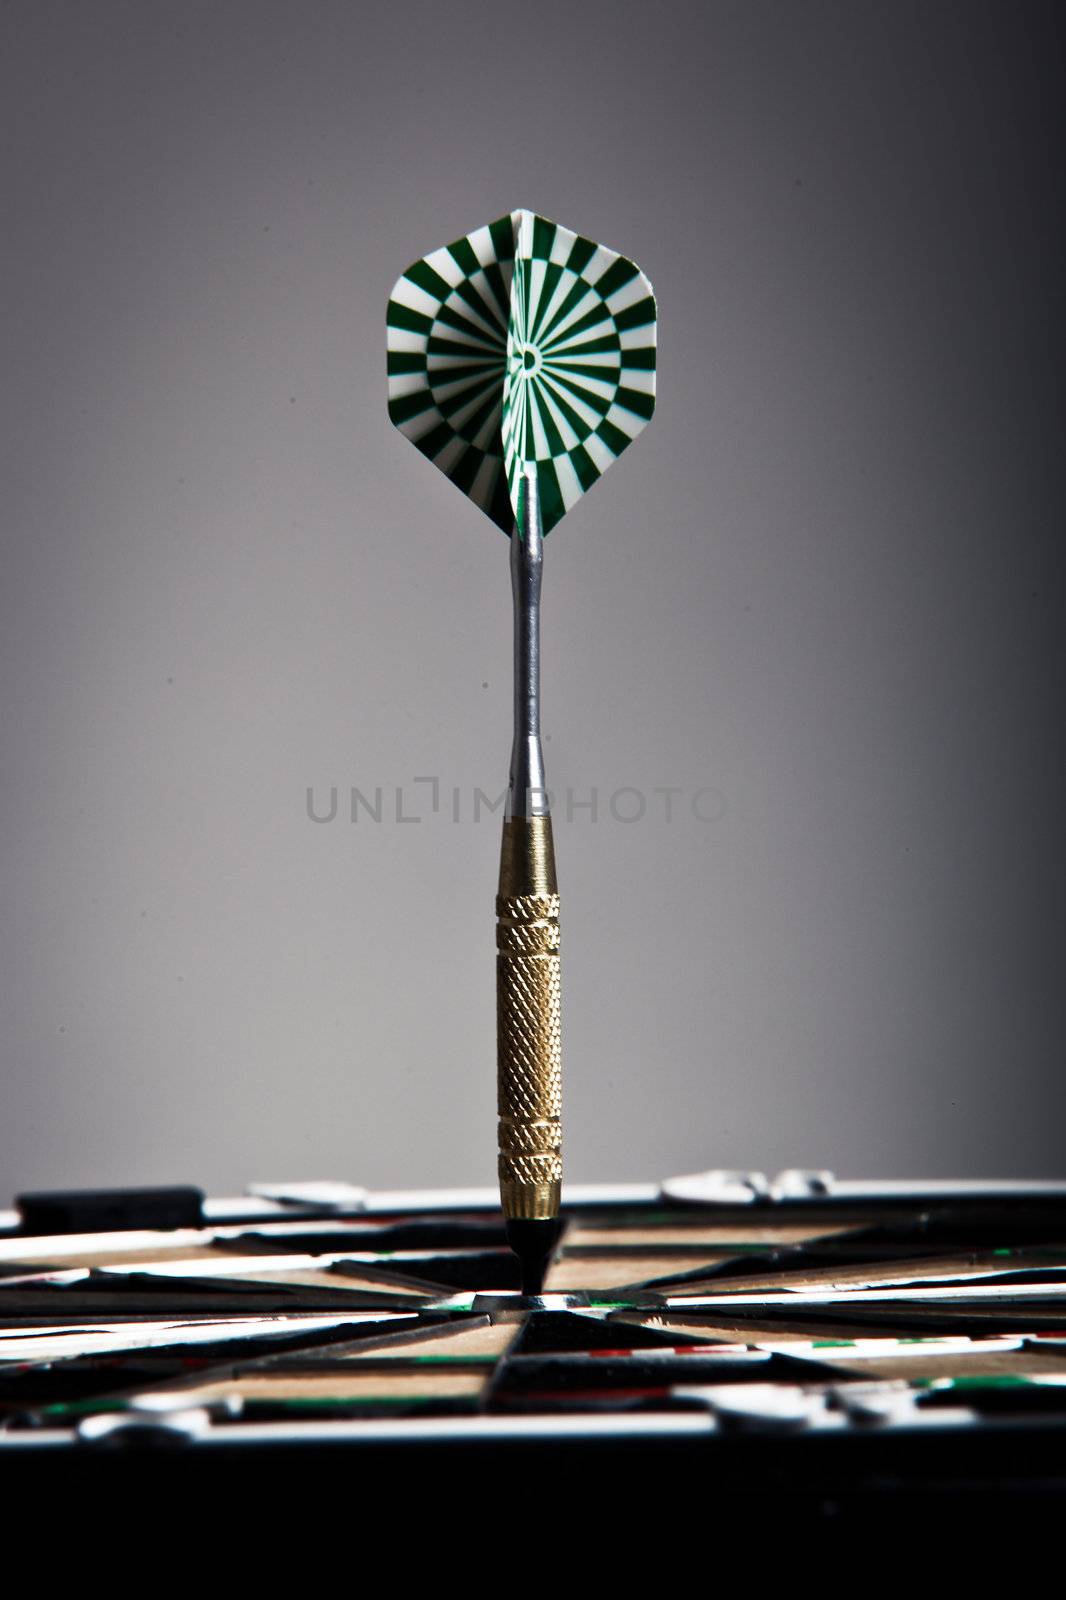 Vertical View Of An Arrow On Darts Board by nfx702